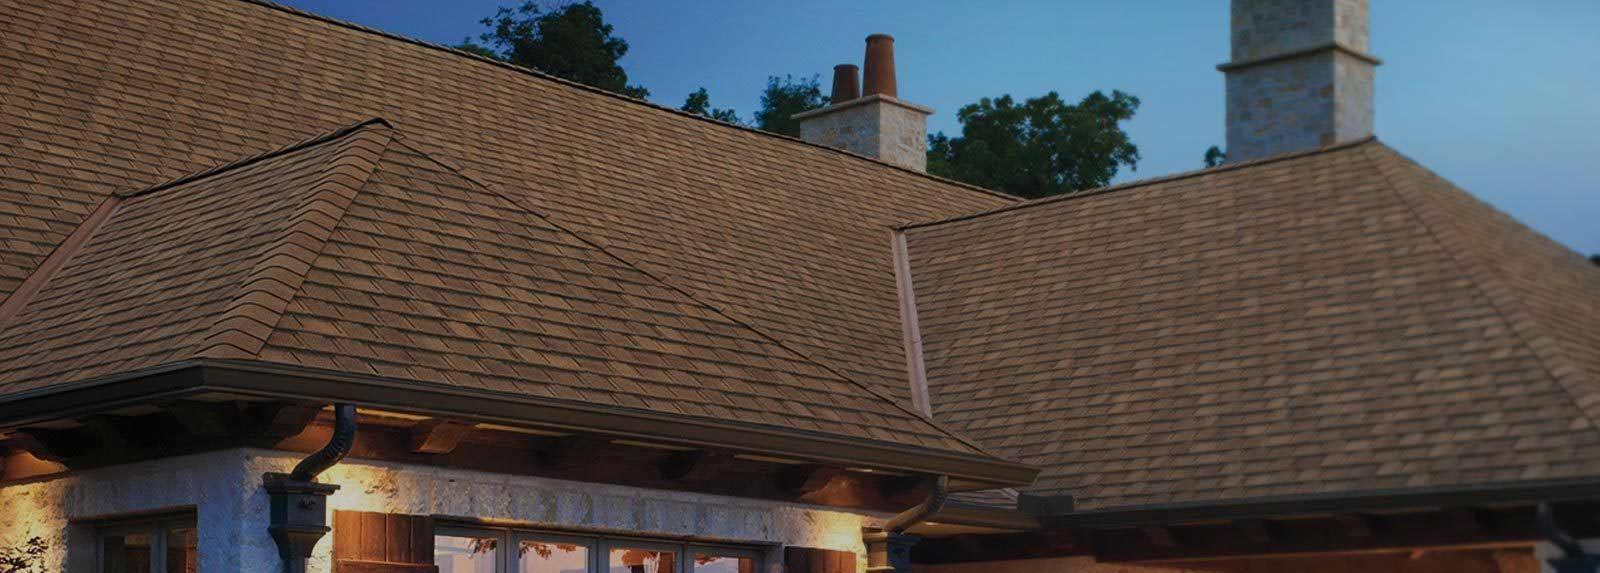 Roofing Prices in Fort Worth, TX